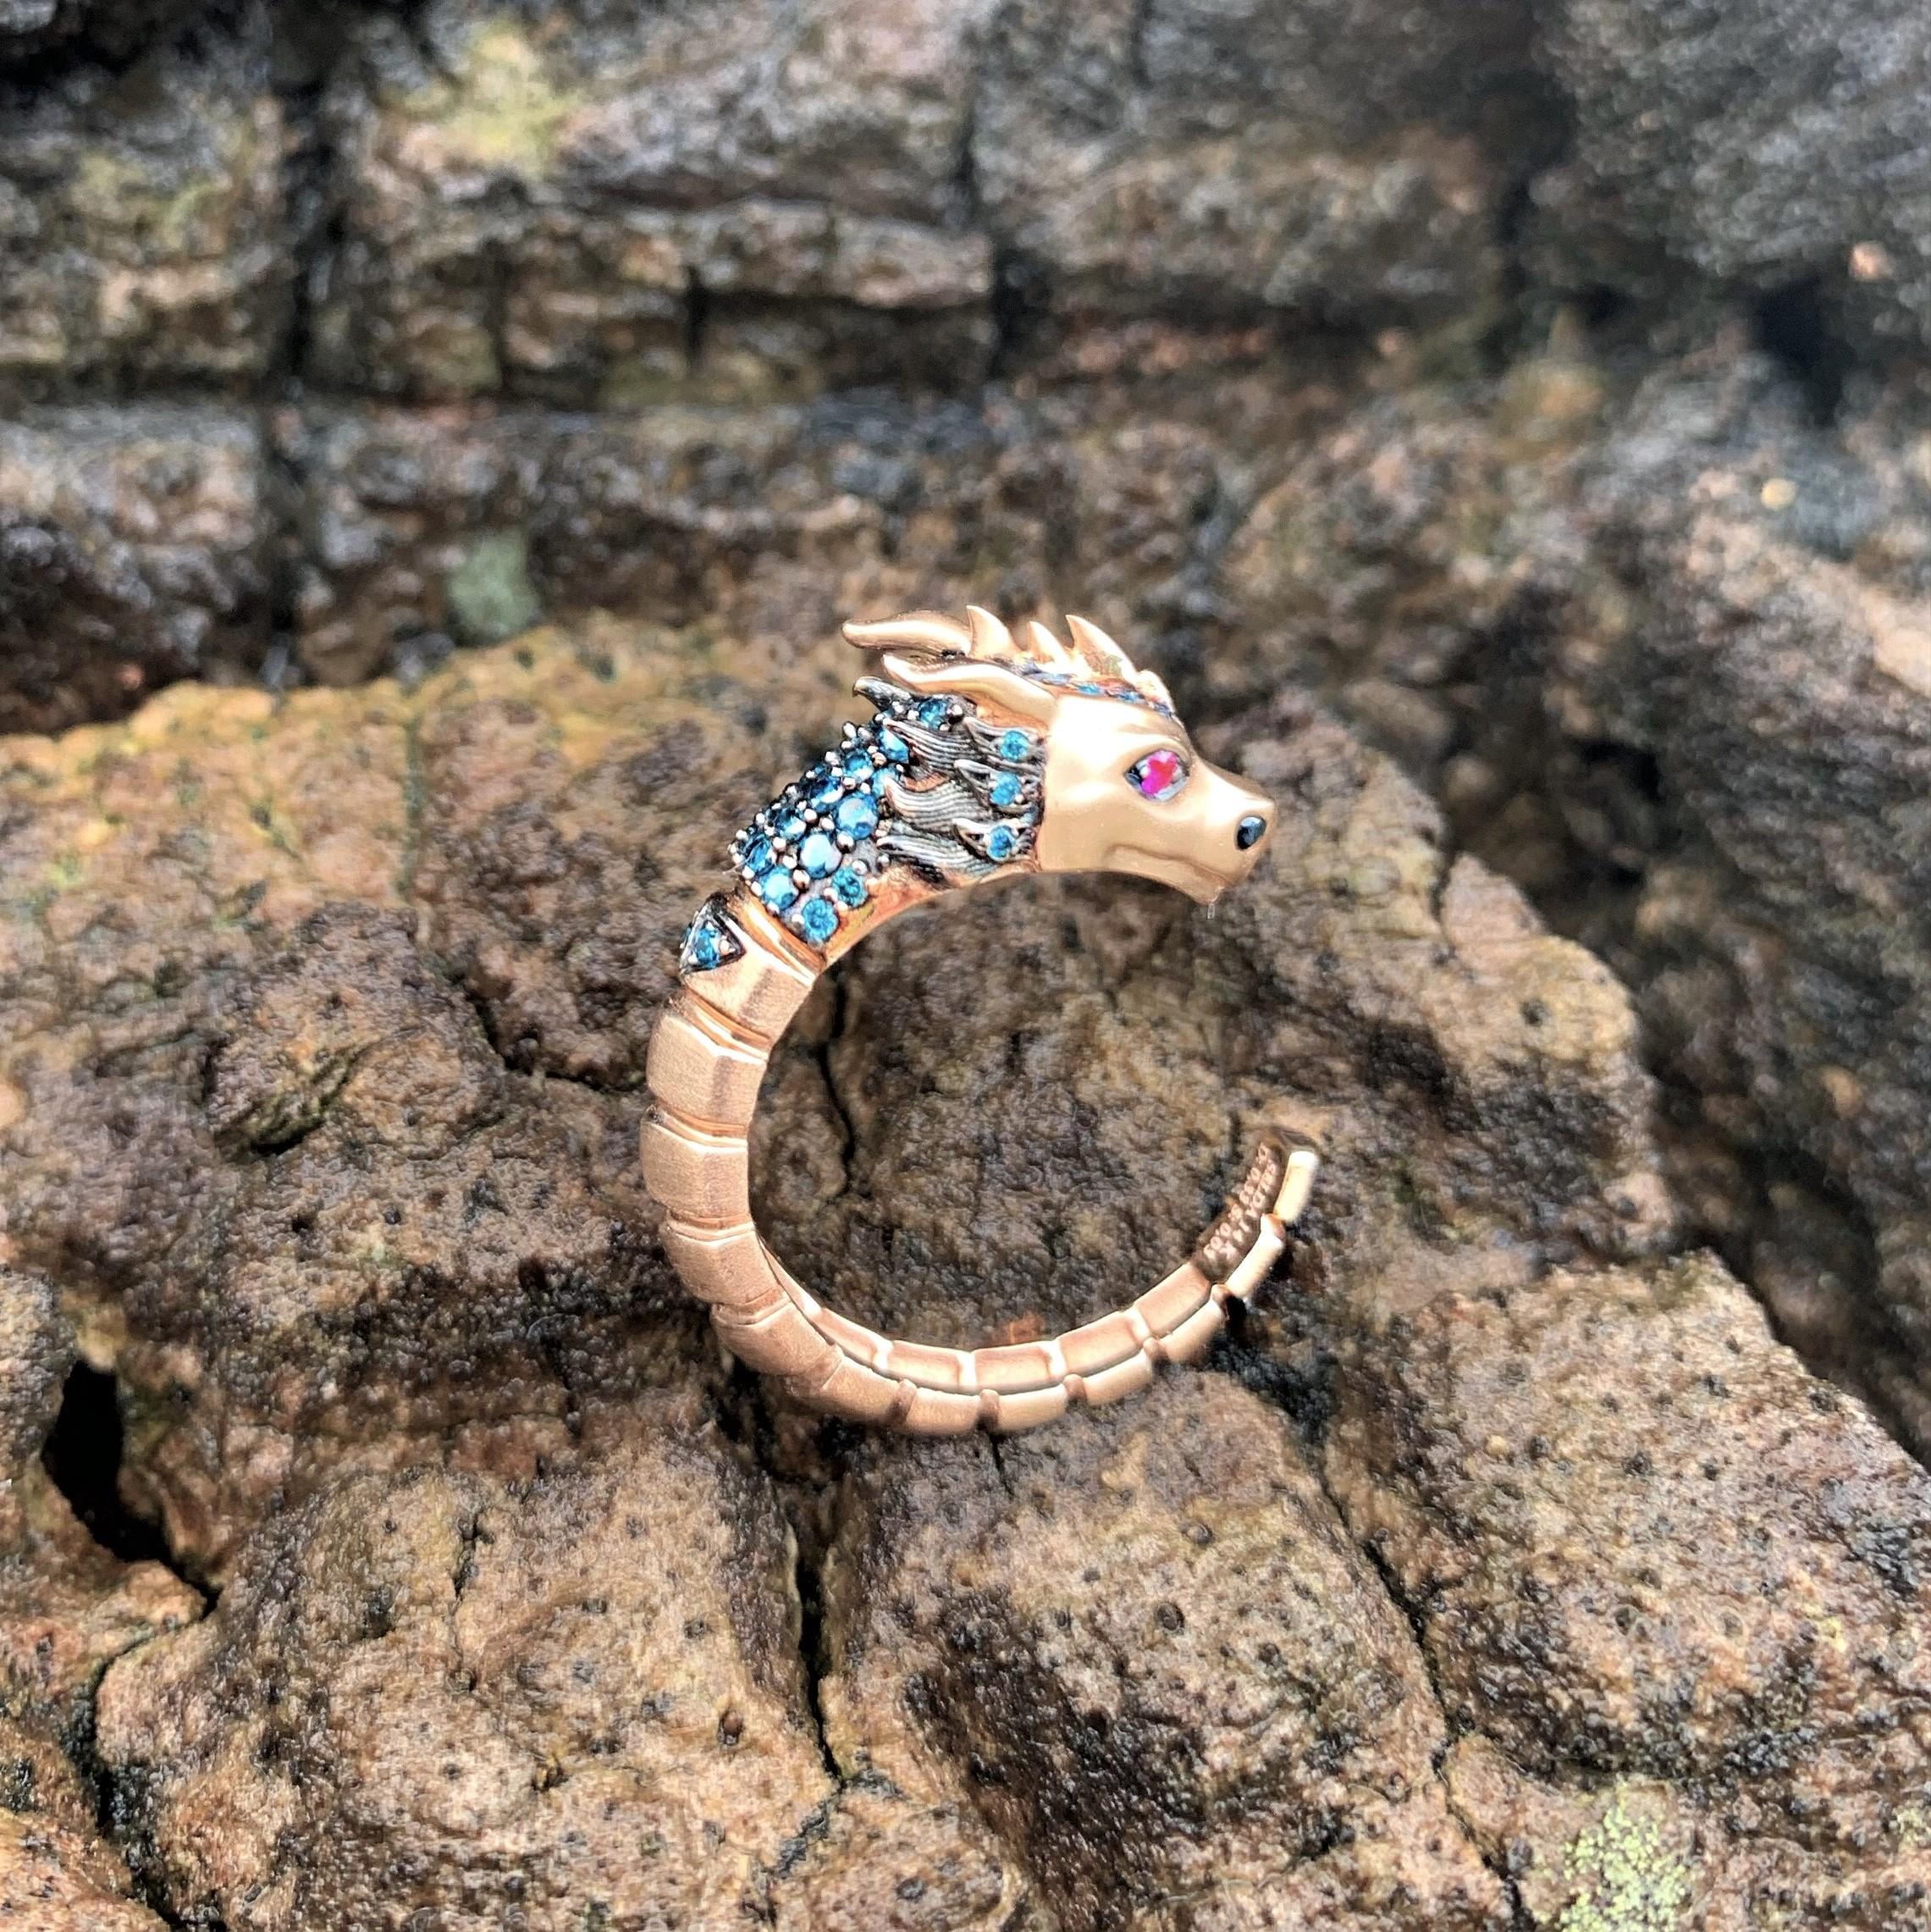 Dragon Lady Collection is inspired by the fire element which is one of the elements that represents our life energy. The main form of the collection is dragon; it is the symbol of strength, courage and prosperity. 

Ananta sesha ring in 14k rose